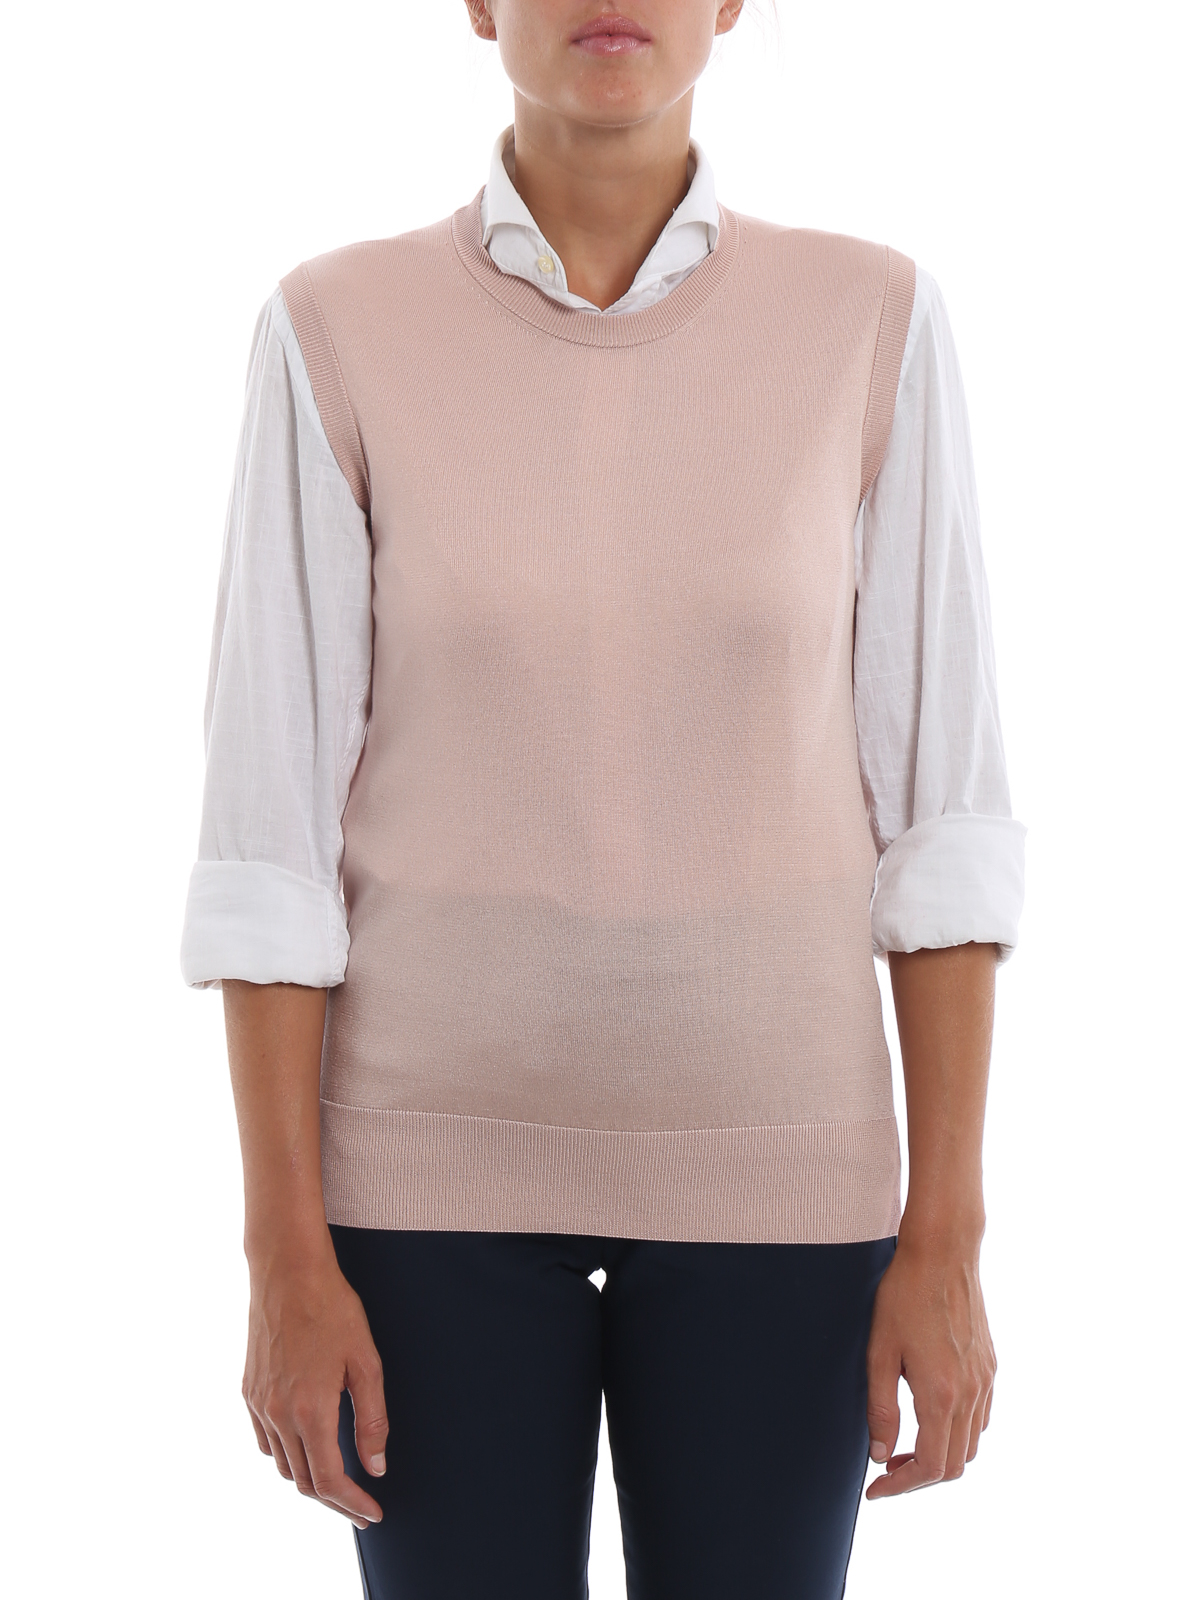 Womens Clothing Jumpers and knitwear Sleeveless jumpers Pink Dolce & Gabbana Jumper in Pastel Pink 